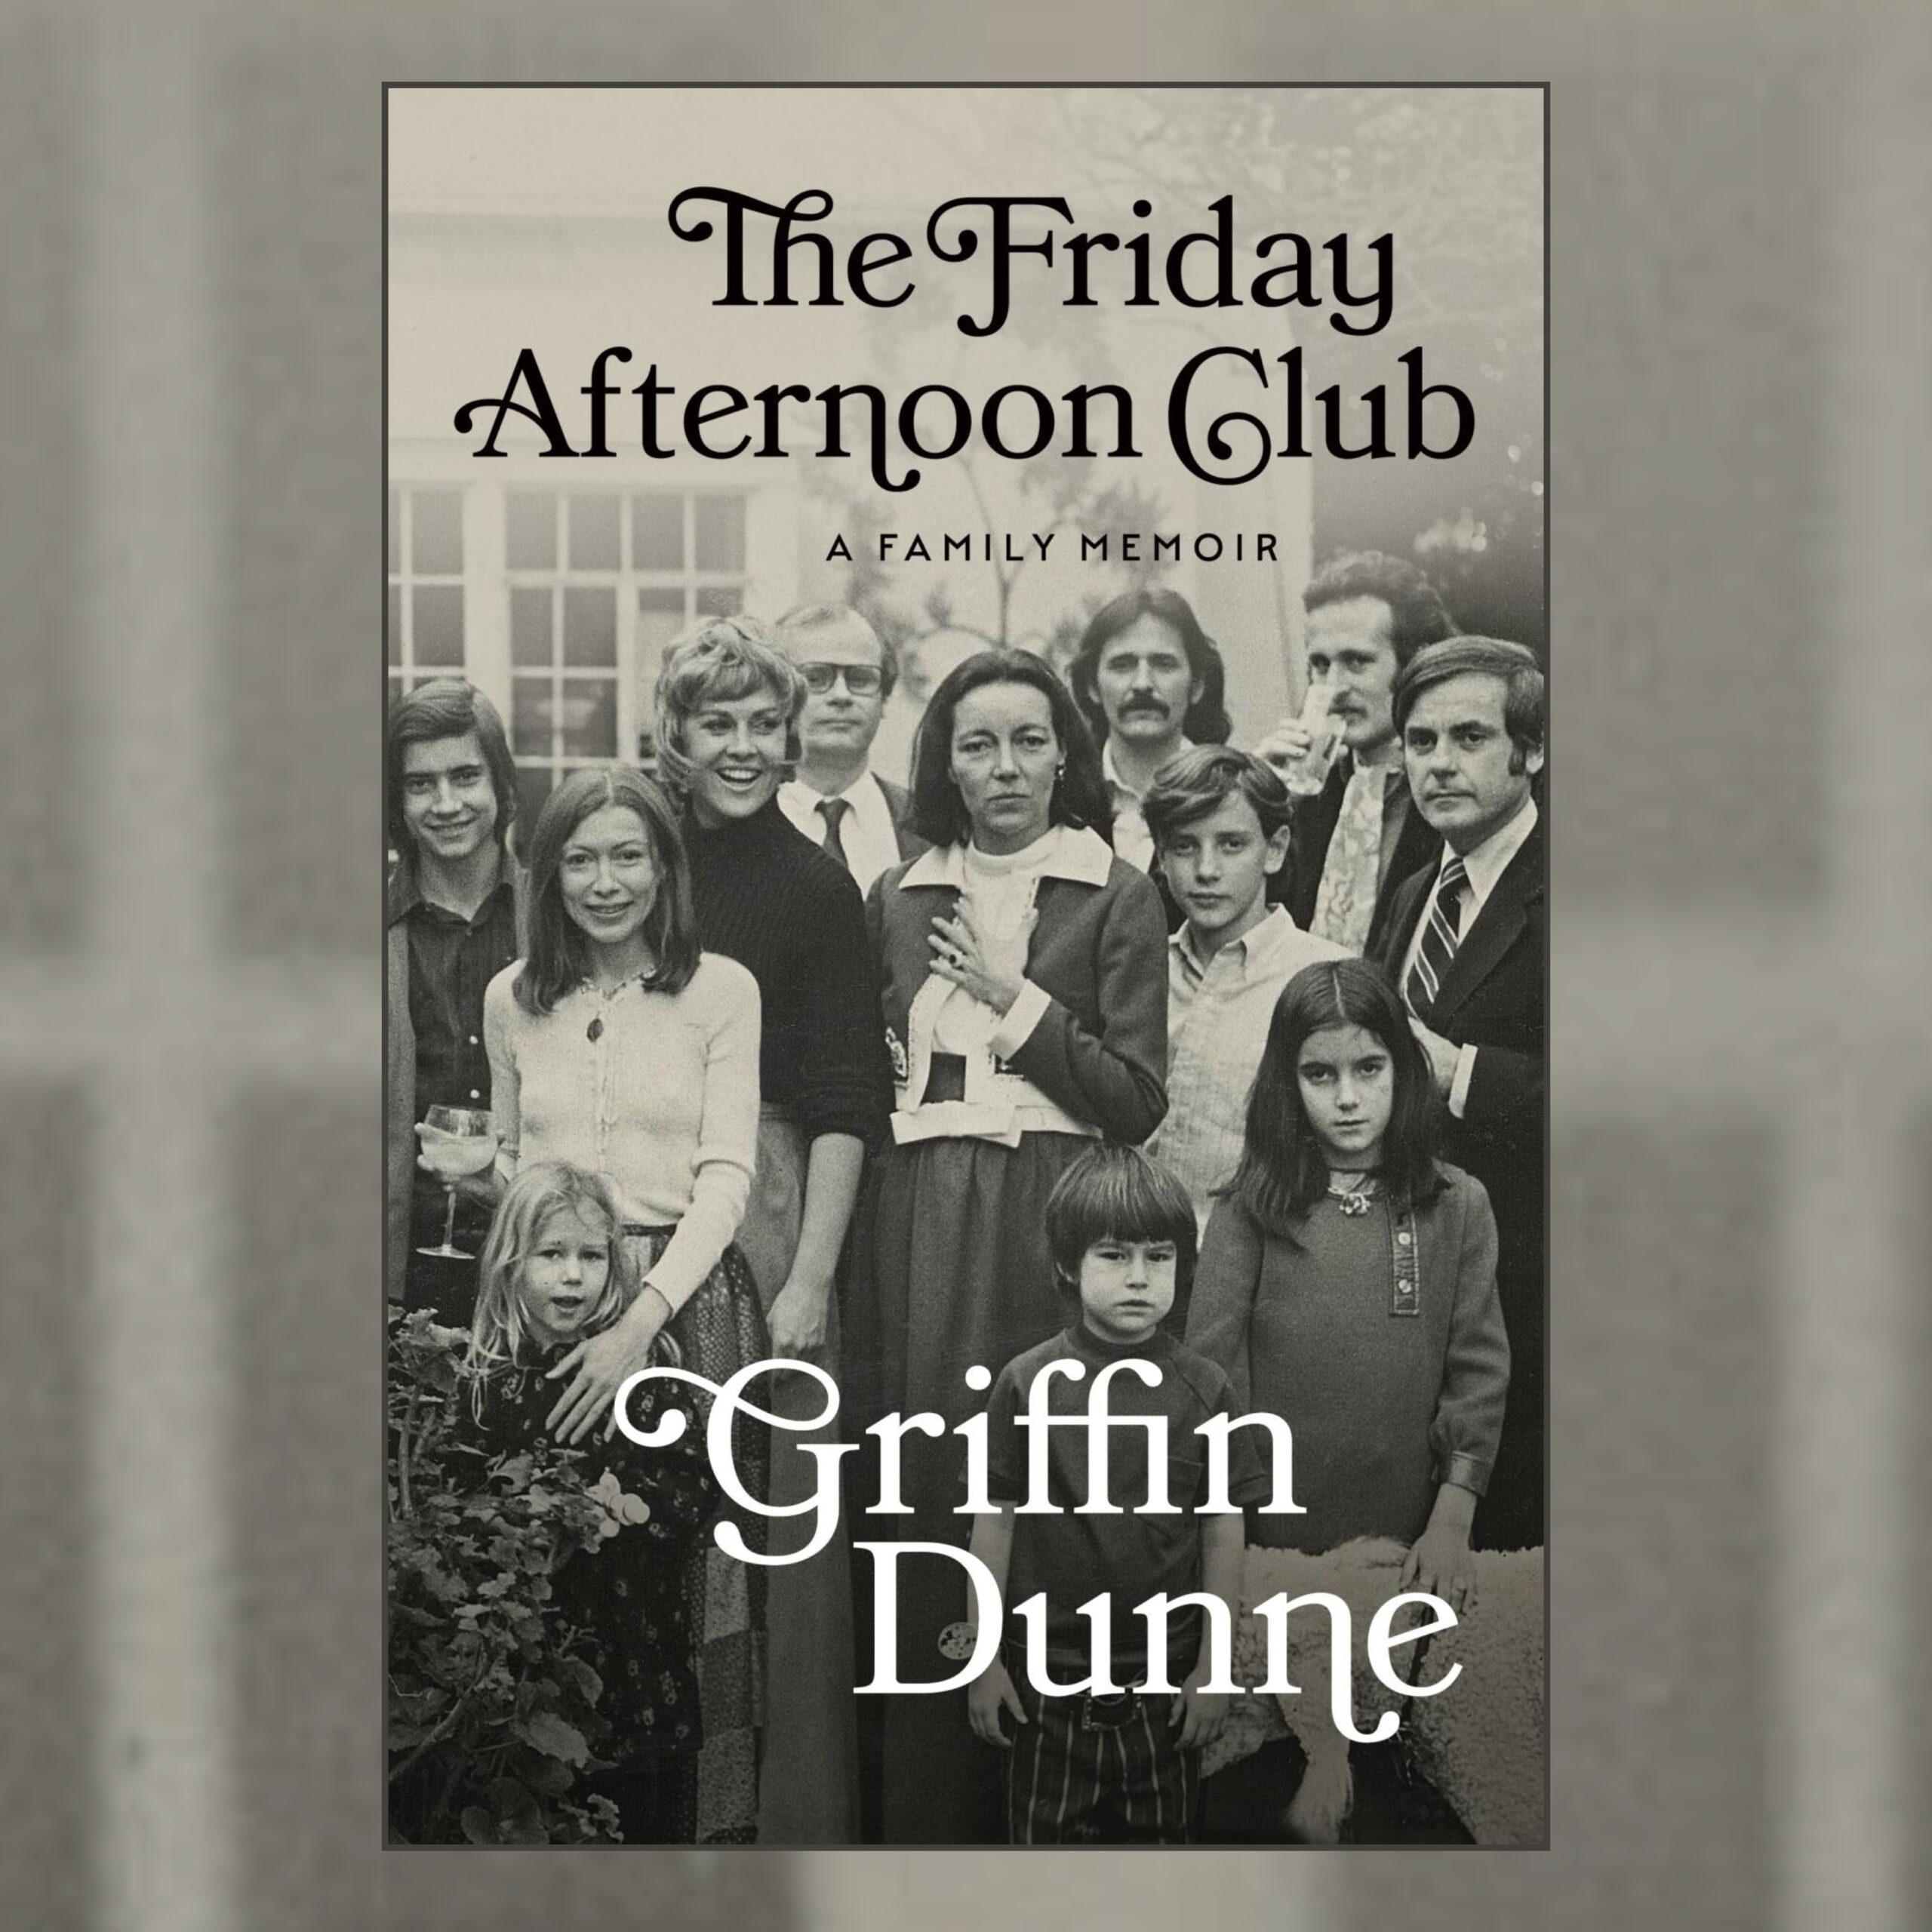 The Book Show | Griffin Dunne - The Friday Afternoon Club